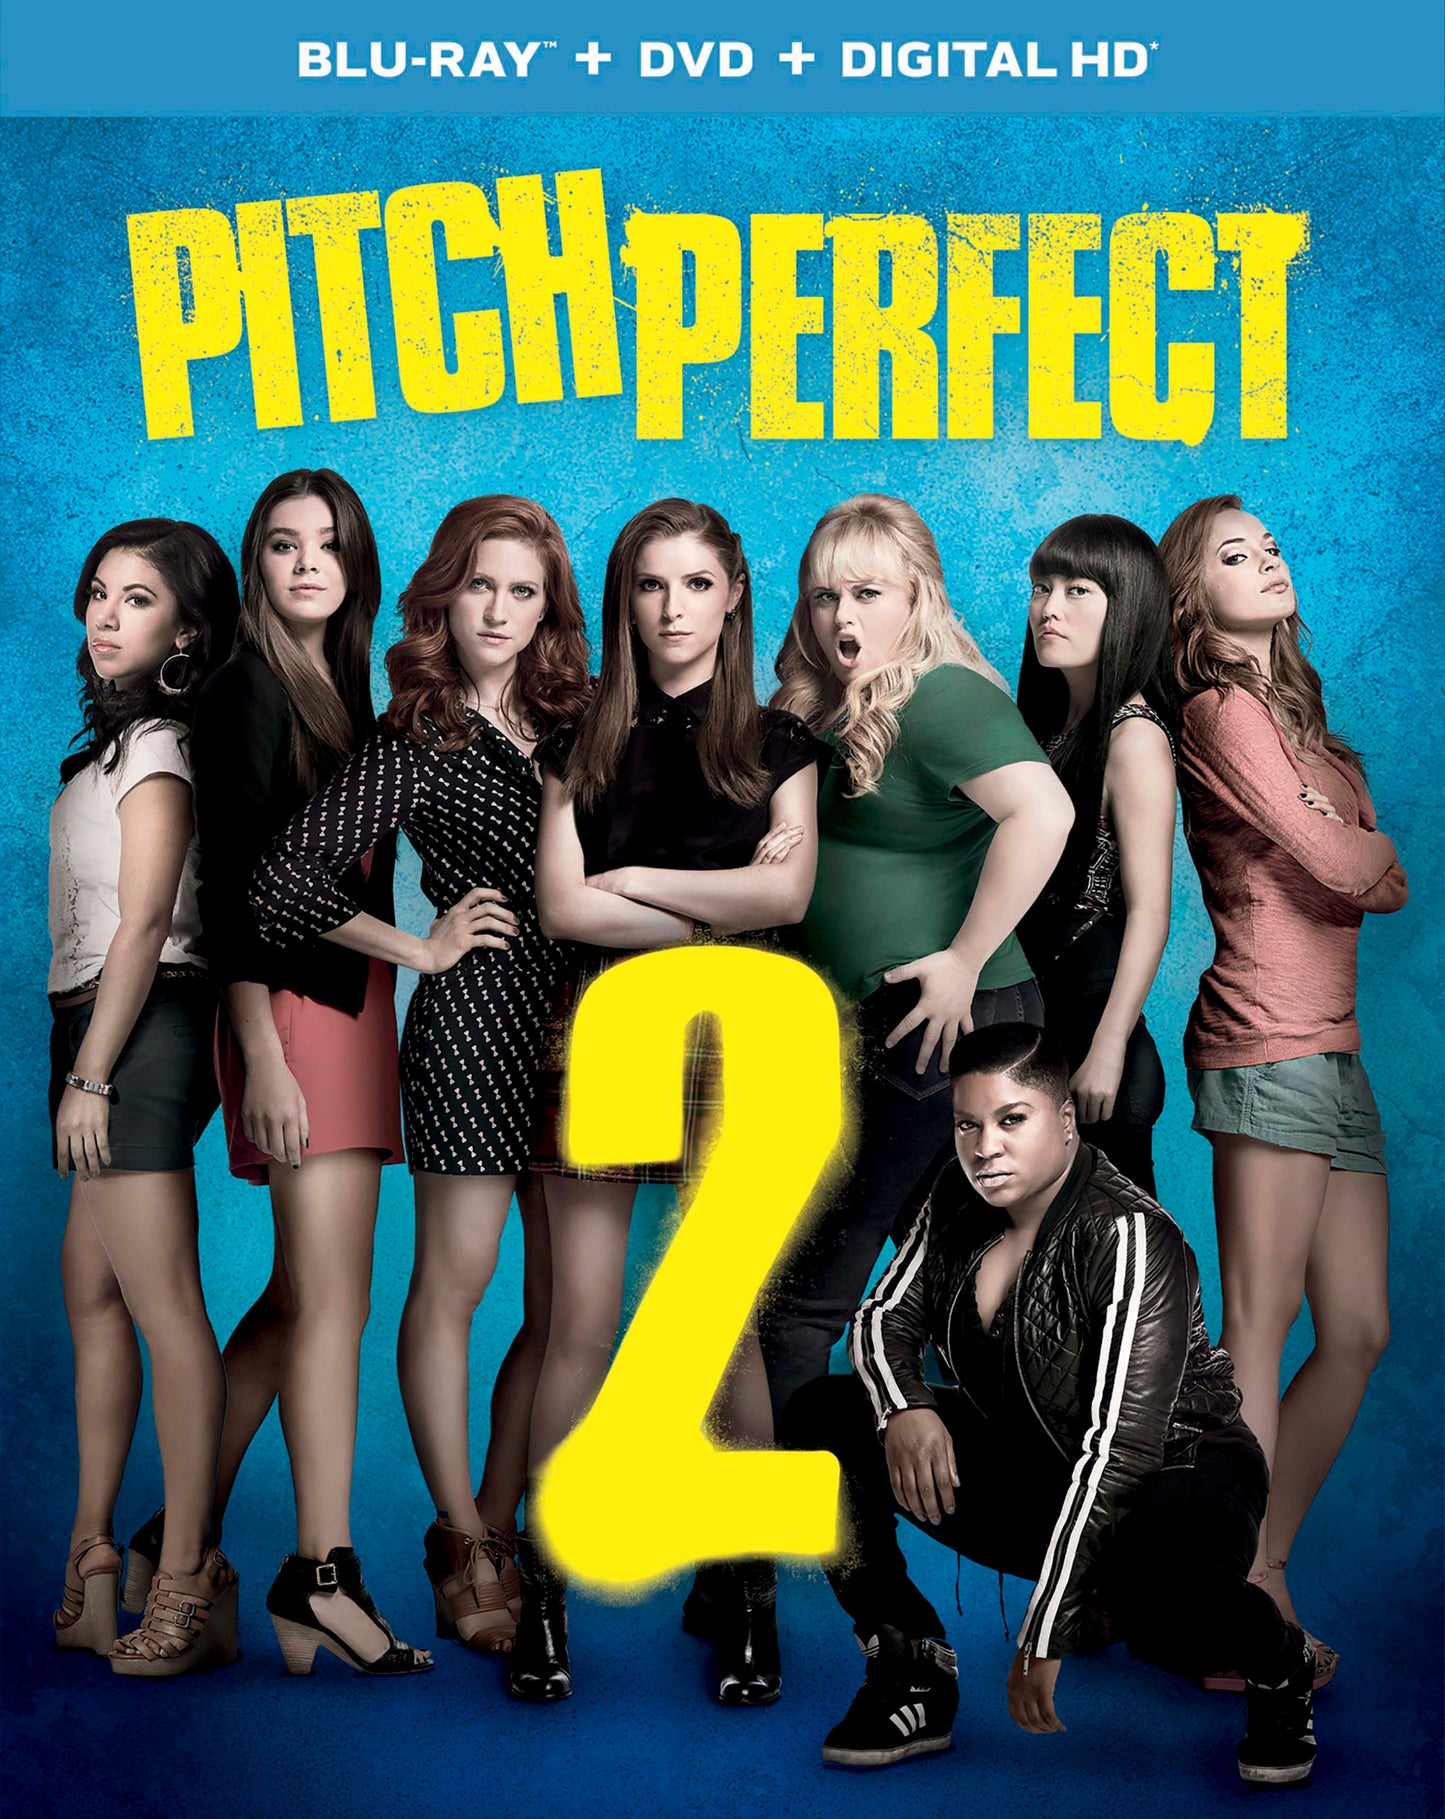 Pitch Perfect 2 [Includes Digital Copy] [Blu-ray/DVD] cover art